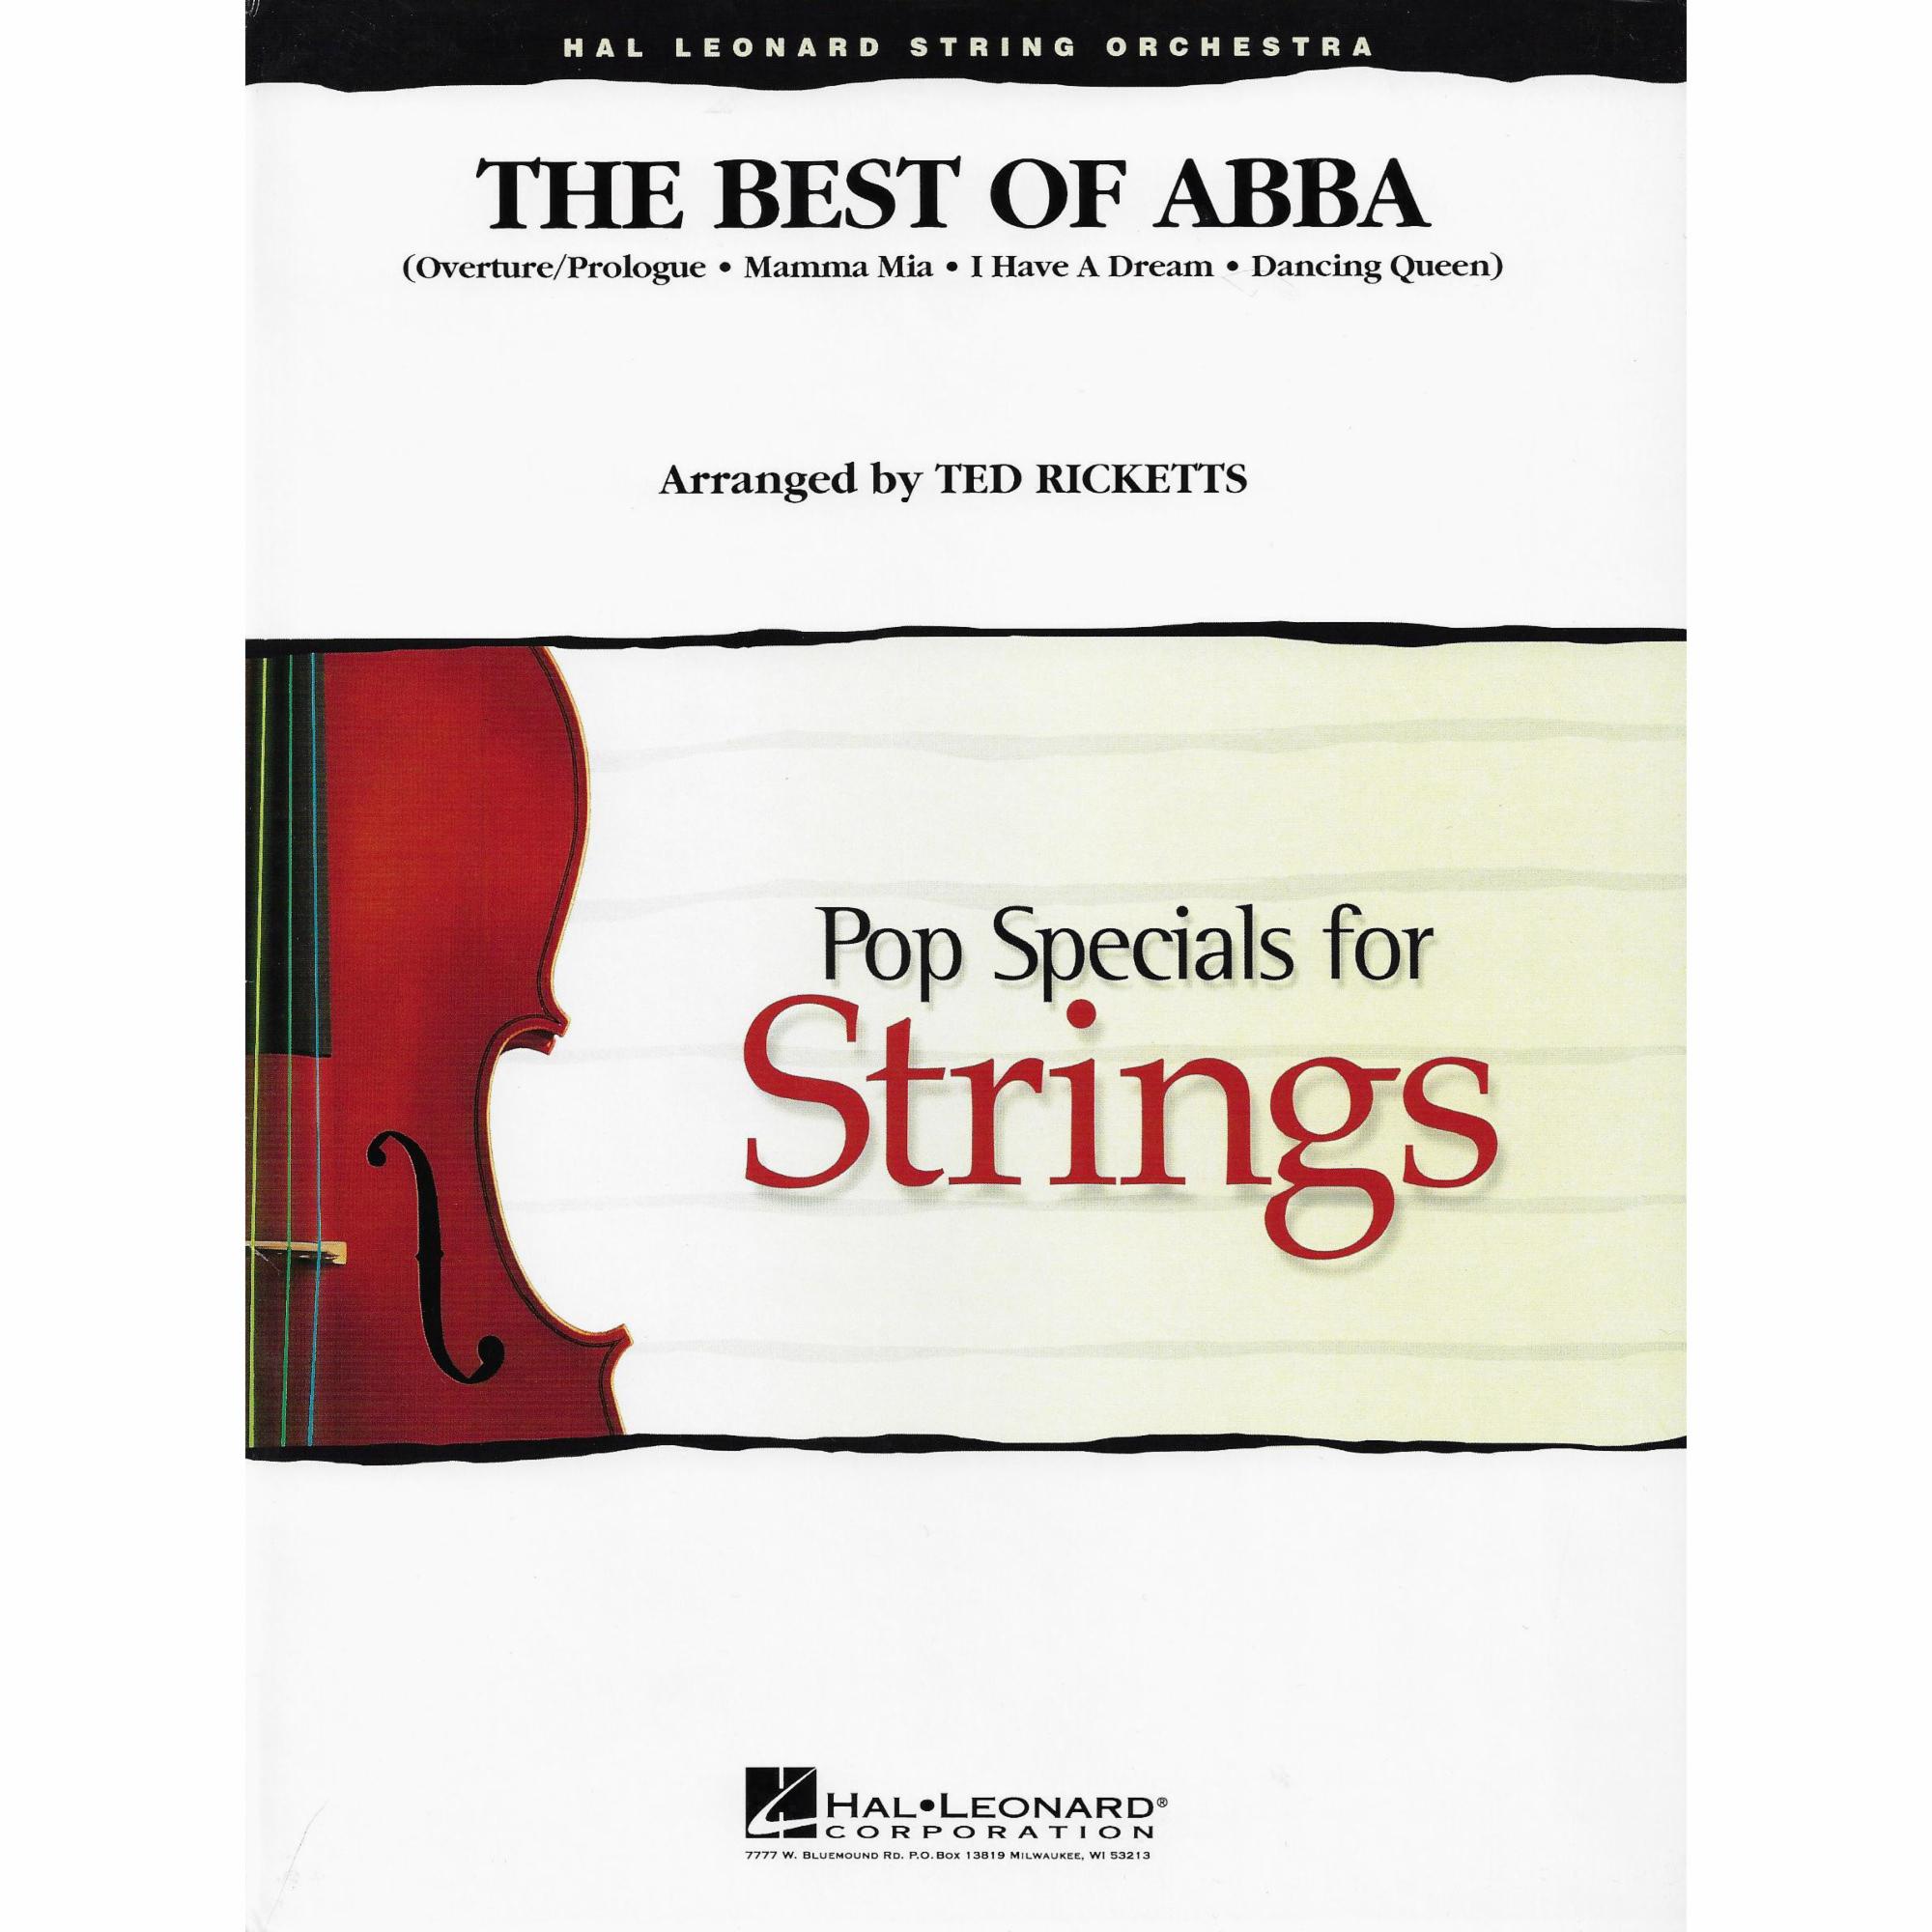 The Best of ABBA for String Orchestra